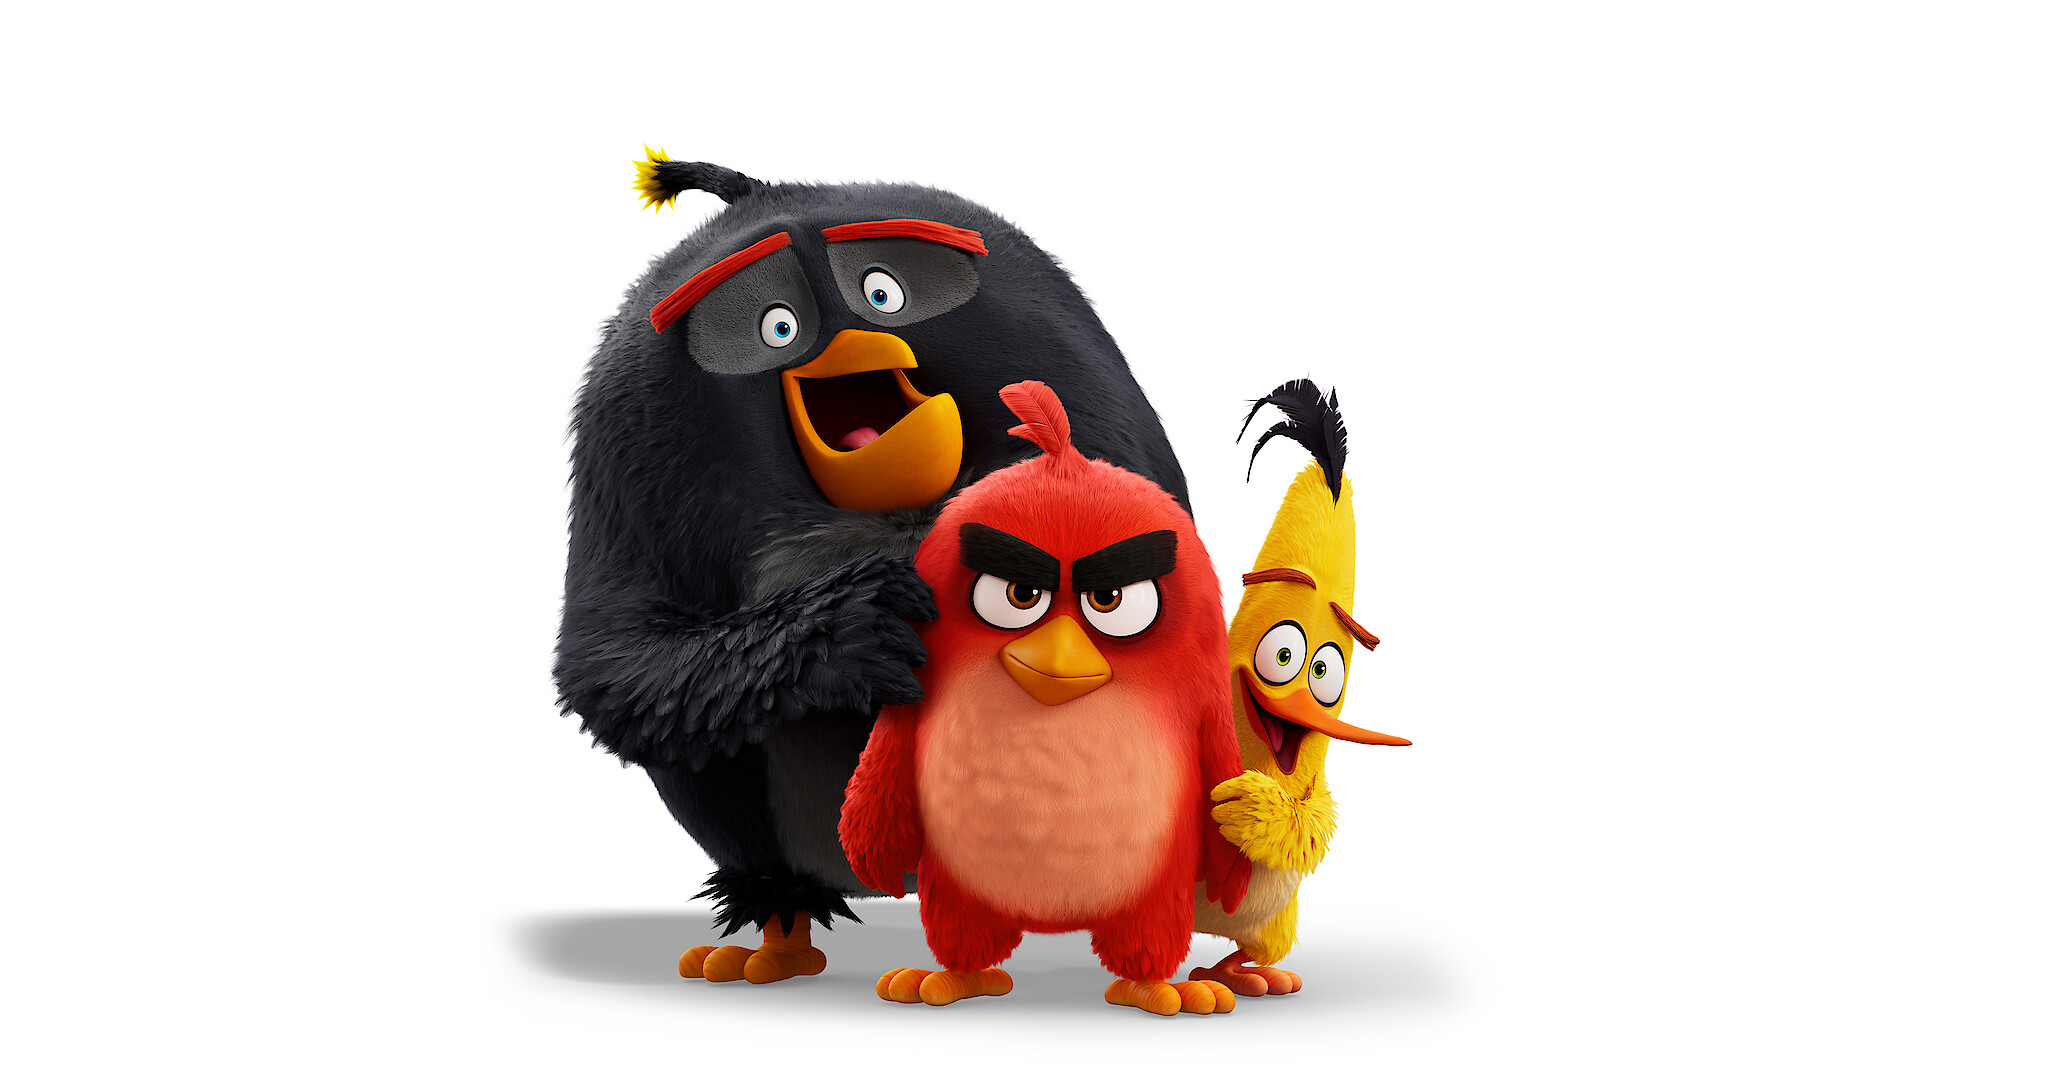 Everything You Need to Know About Angry Birds